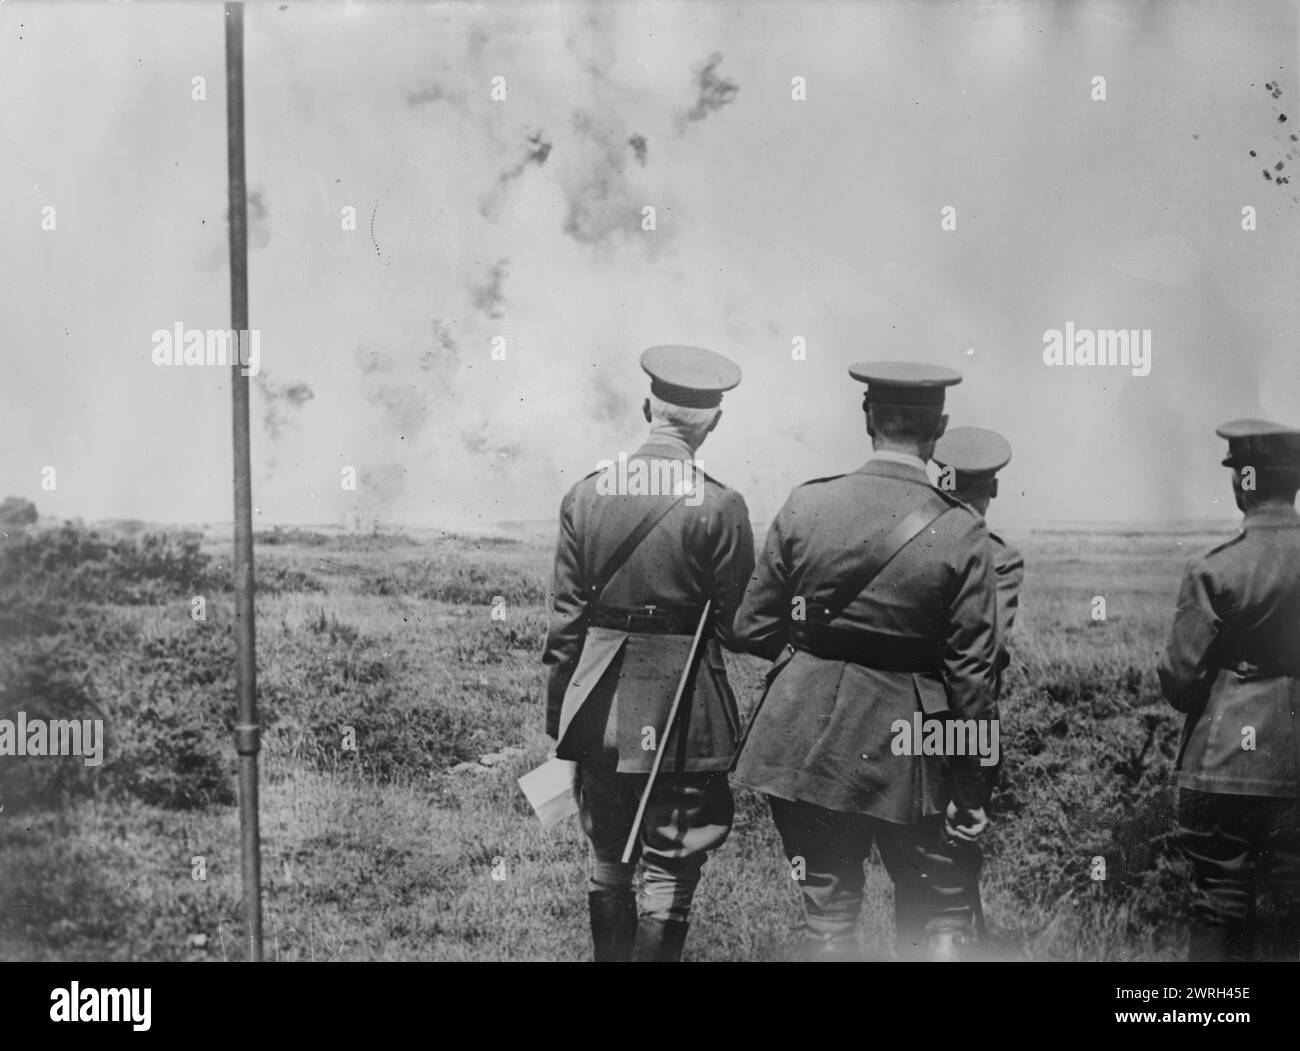 King George V sees trench bombing, 7 Jul 1917. Trench mortar bombardment during King George V's visit to the Gas School, Helfaut, France on July 7, 1917 during World War I. Stock Photo